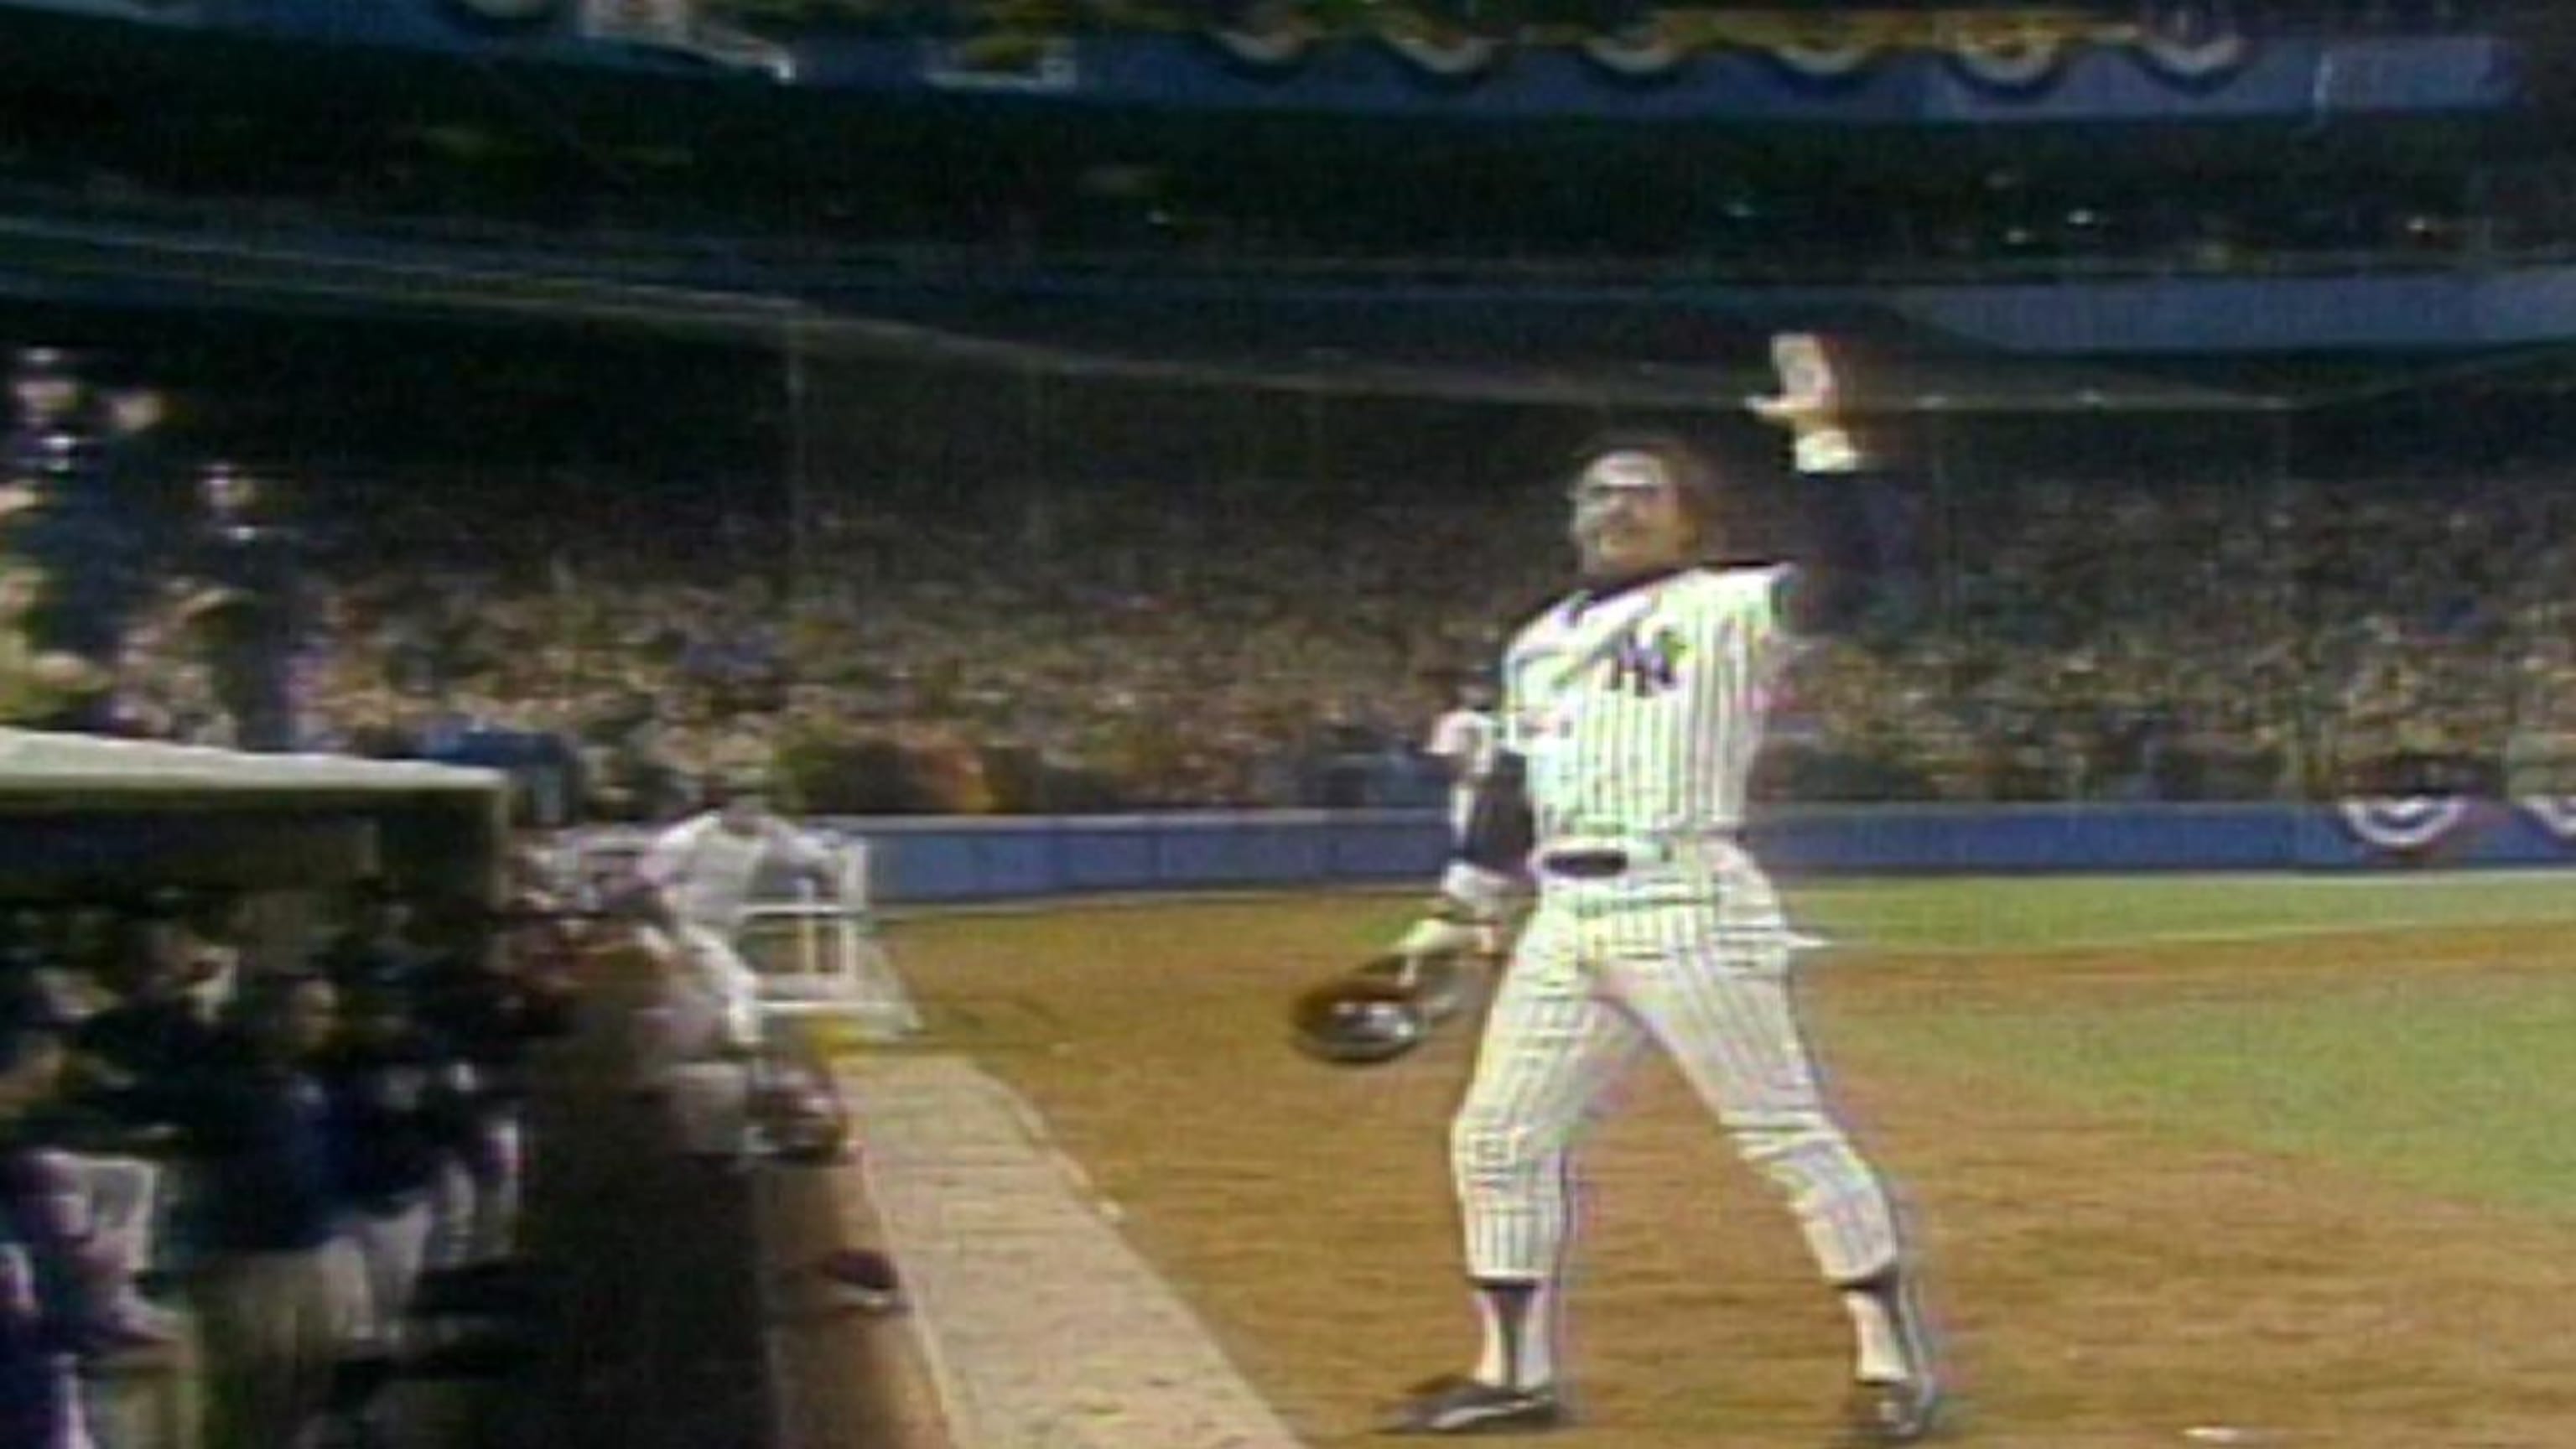 Today marks 40 years since Reggie Jackson transformed into Mr. October